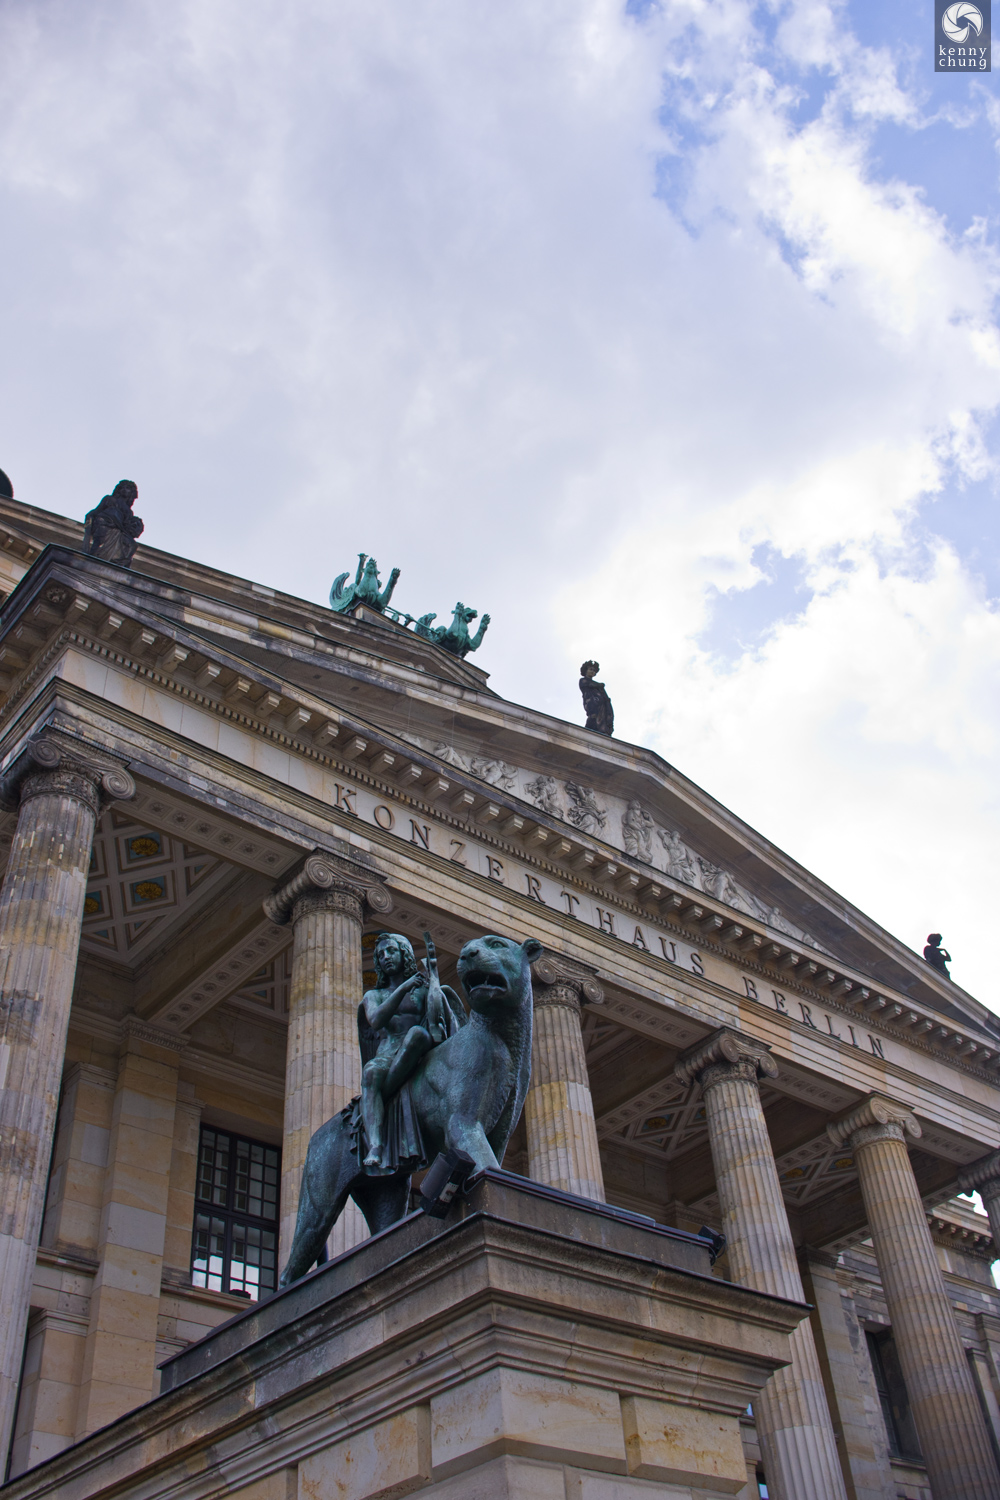 Statues outside the Konzerthaus Concert Hall in Berlin